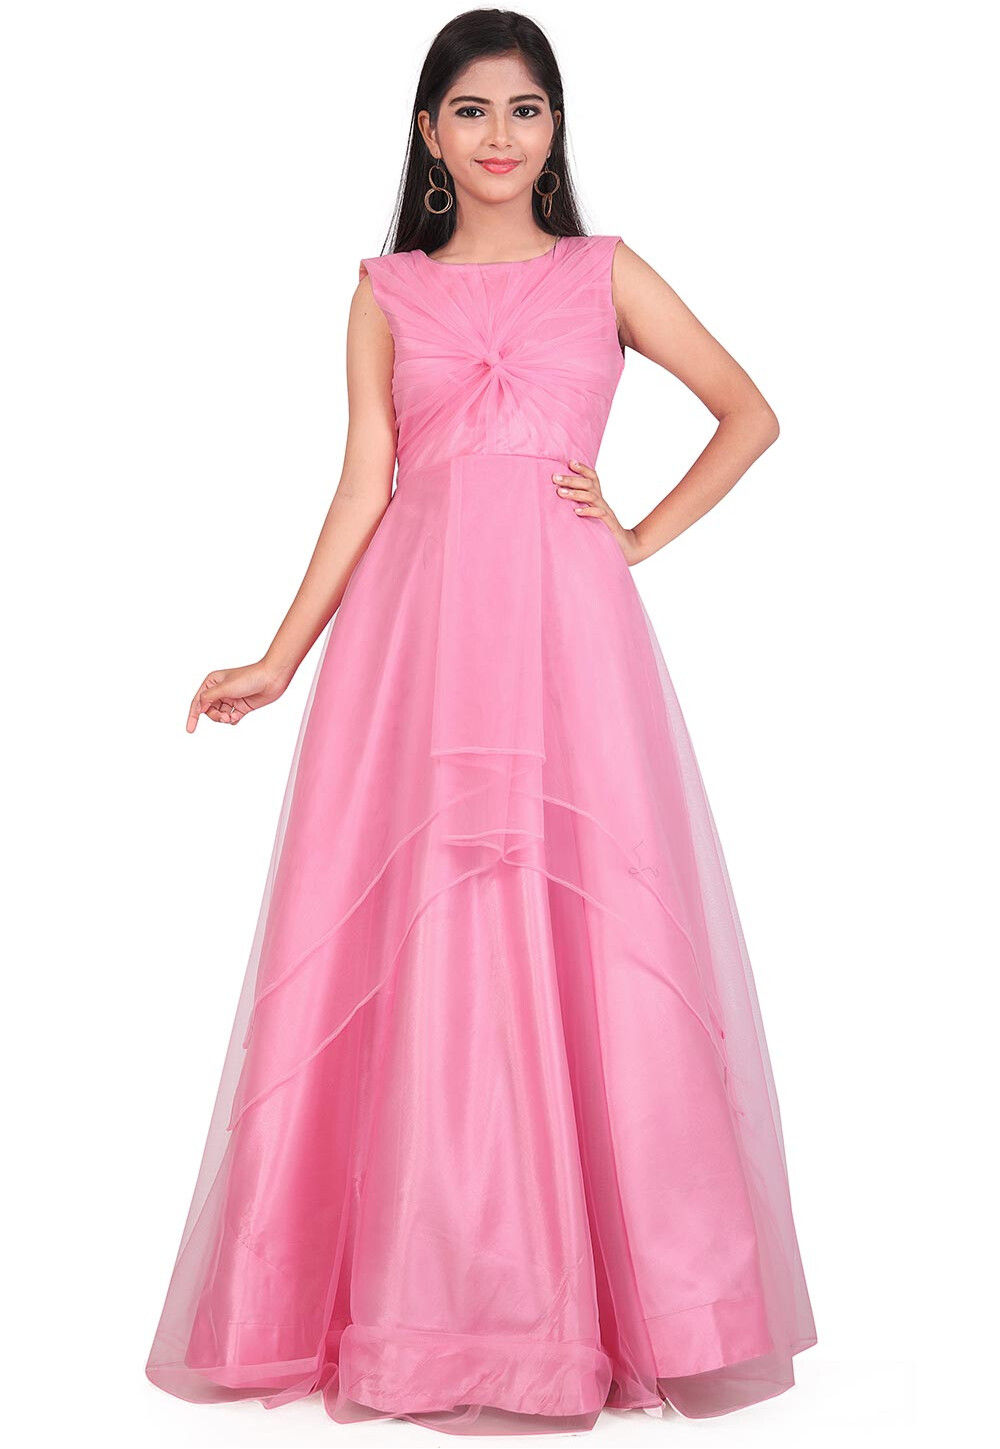 Hand Embroidered Net Toga Gown in Pink : TCH97